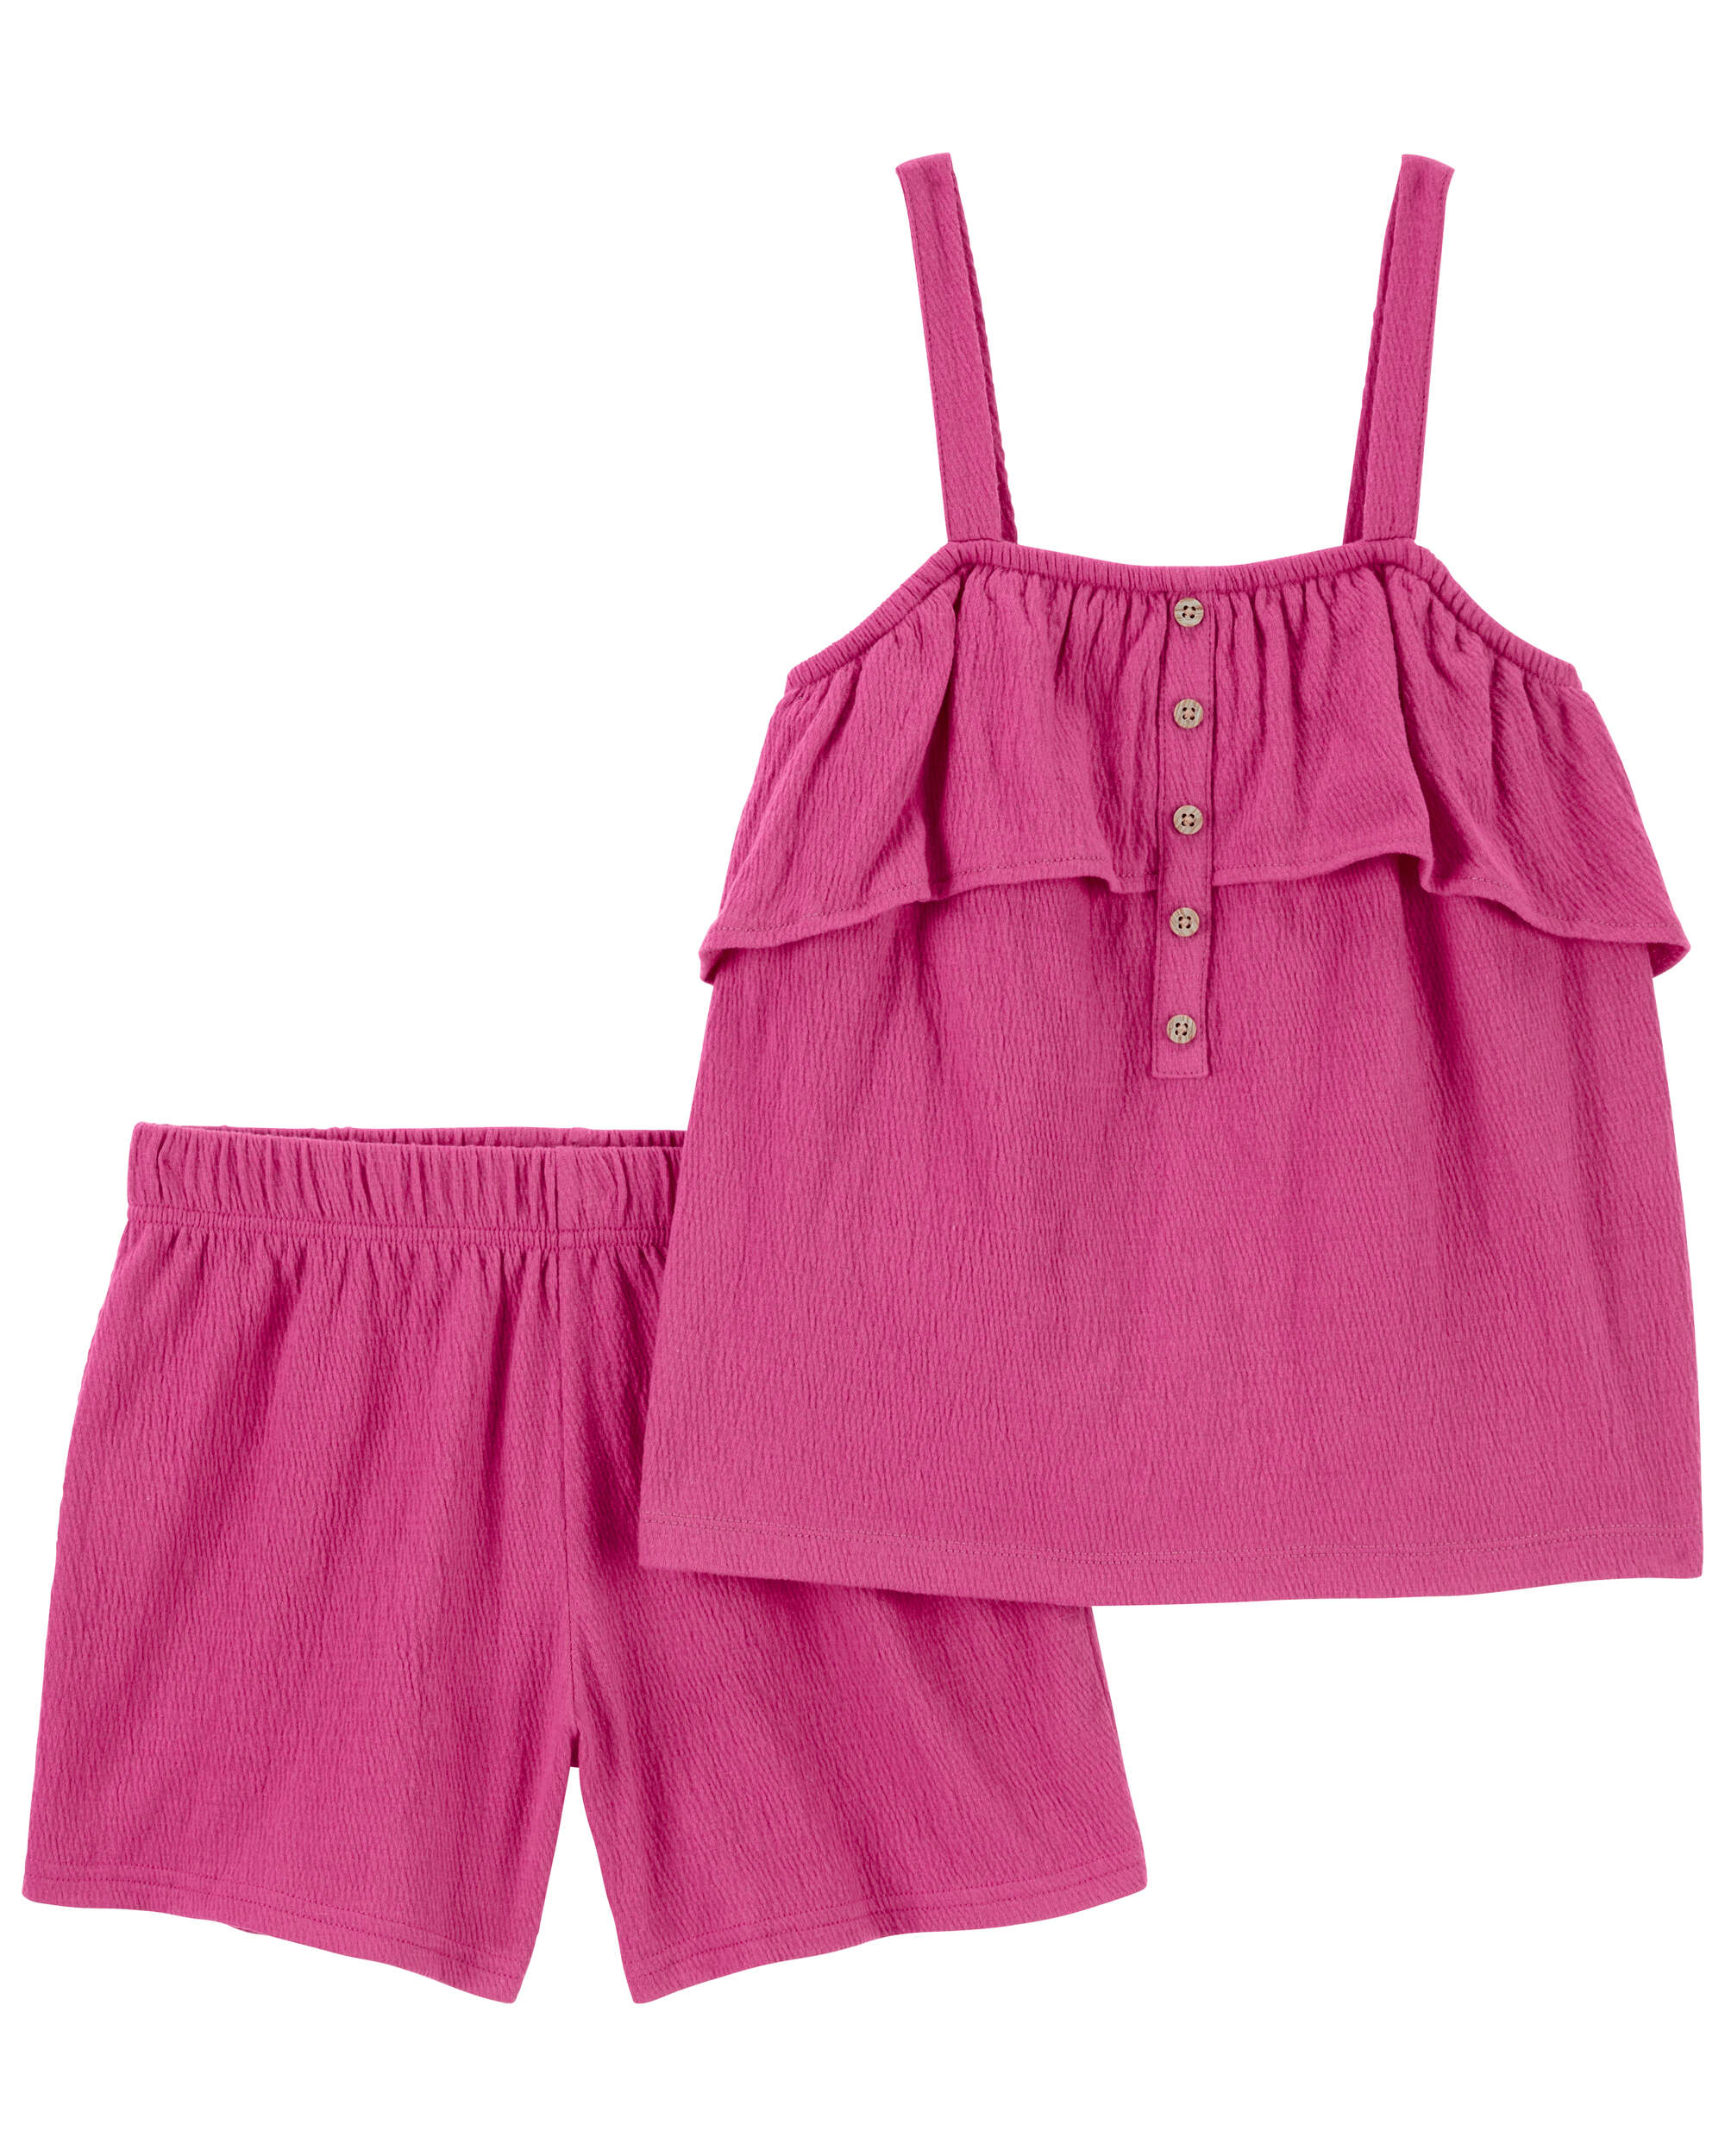  Jersey, Children's Clothes, Top and Bottom Set